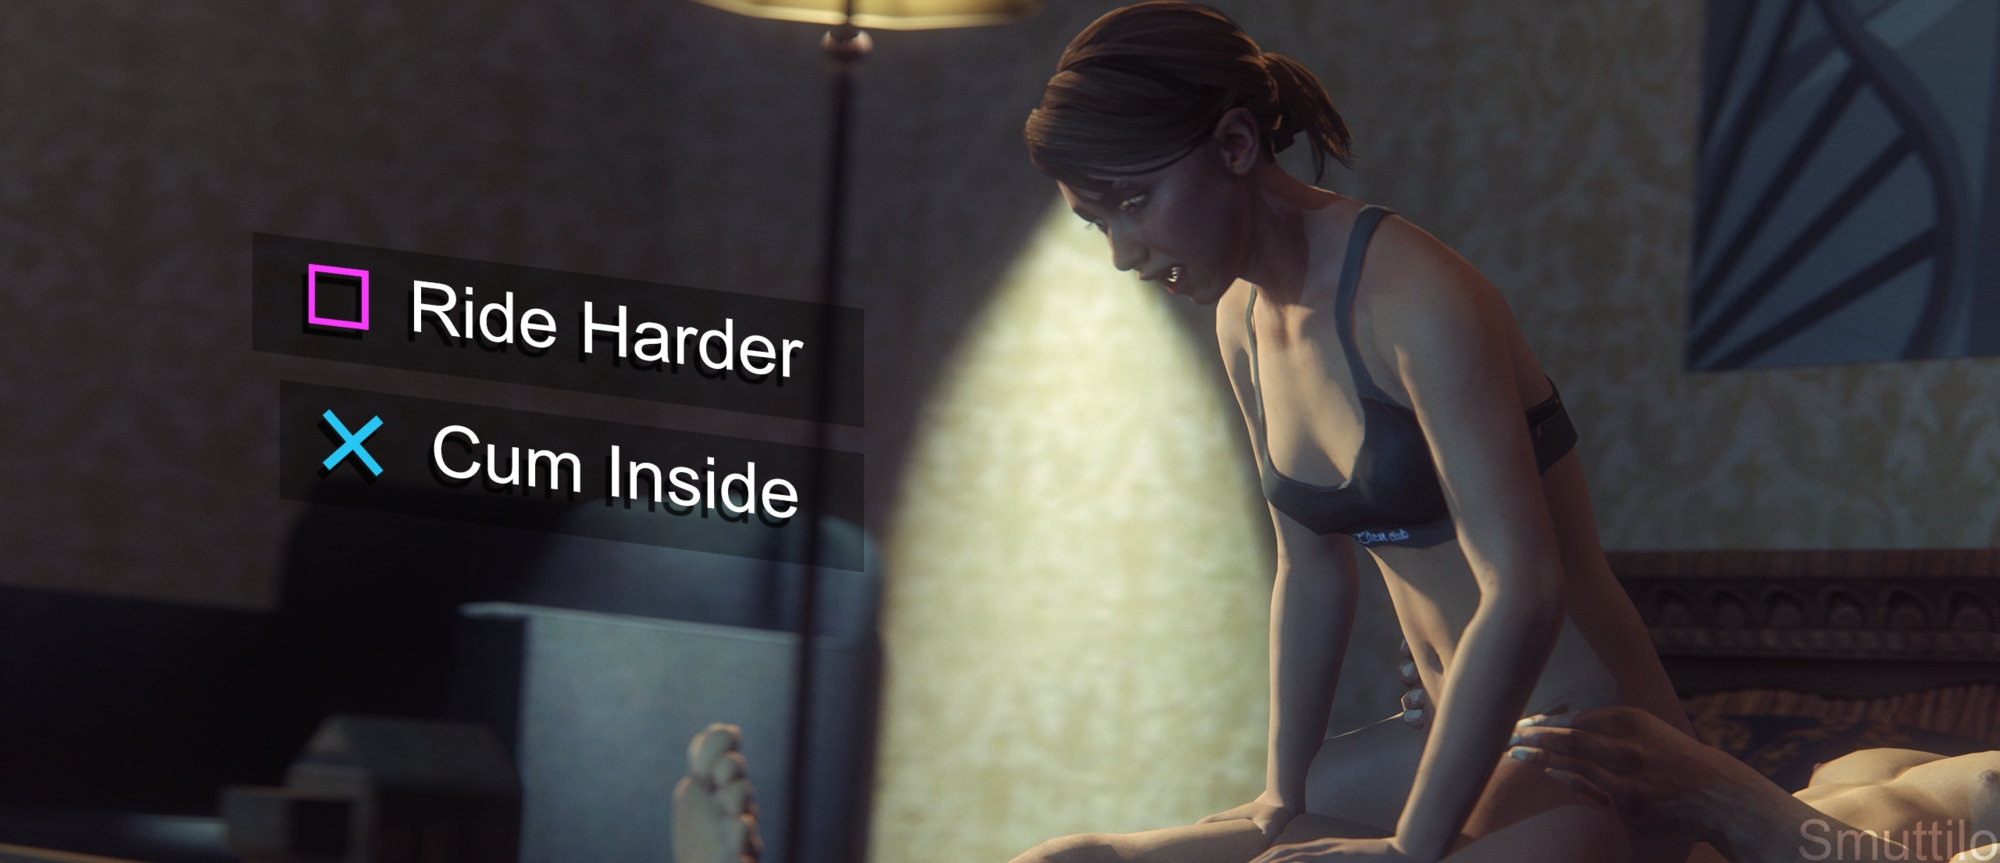 Kara is your loyal servant for the night Kara Detroit Become Human Source Filmmaker Blowjob Big Cock Big Dick 1boy1girl Doggy Style Cowgirl Cowgirl Position Sex 2